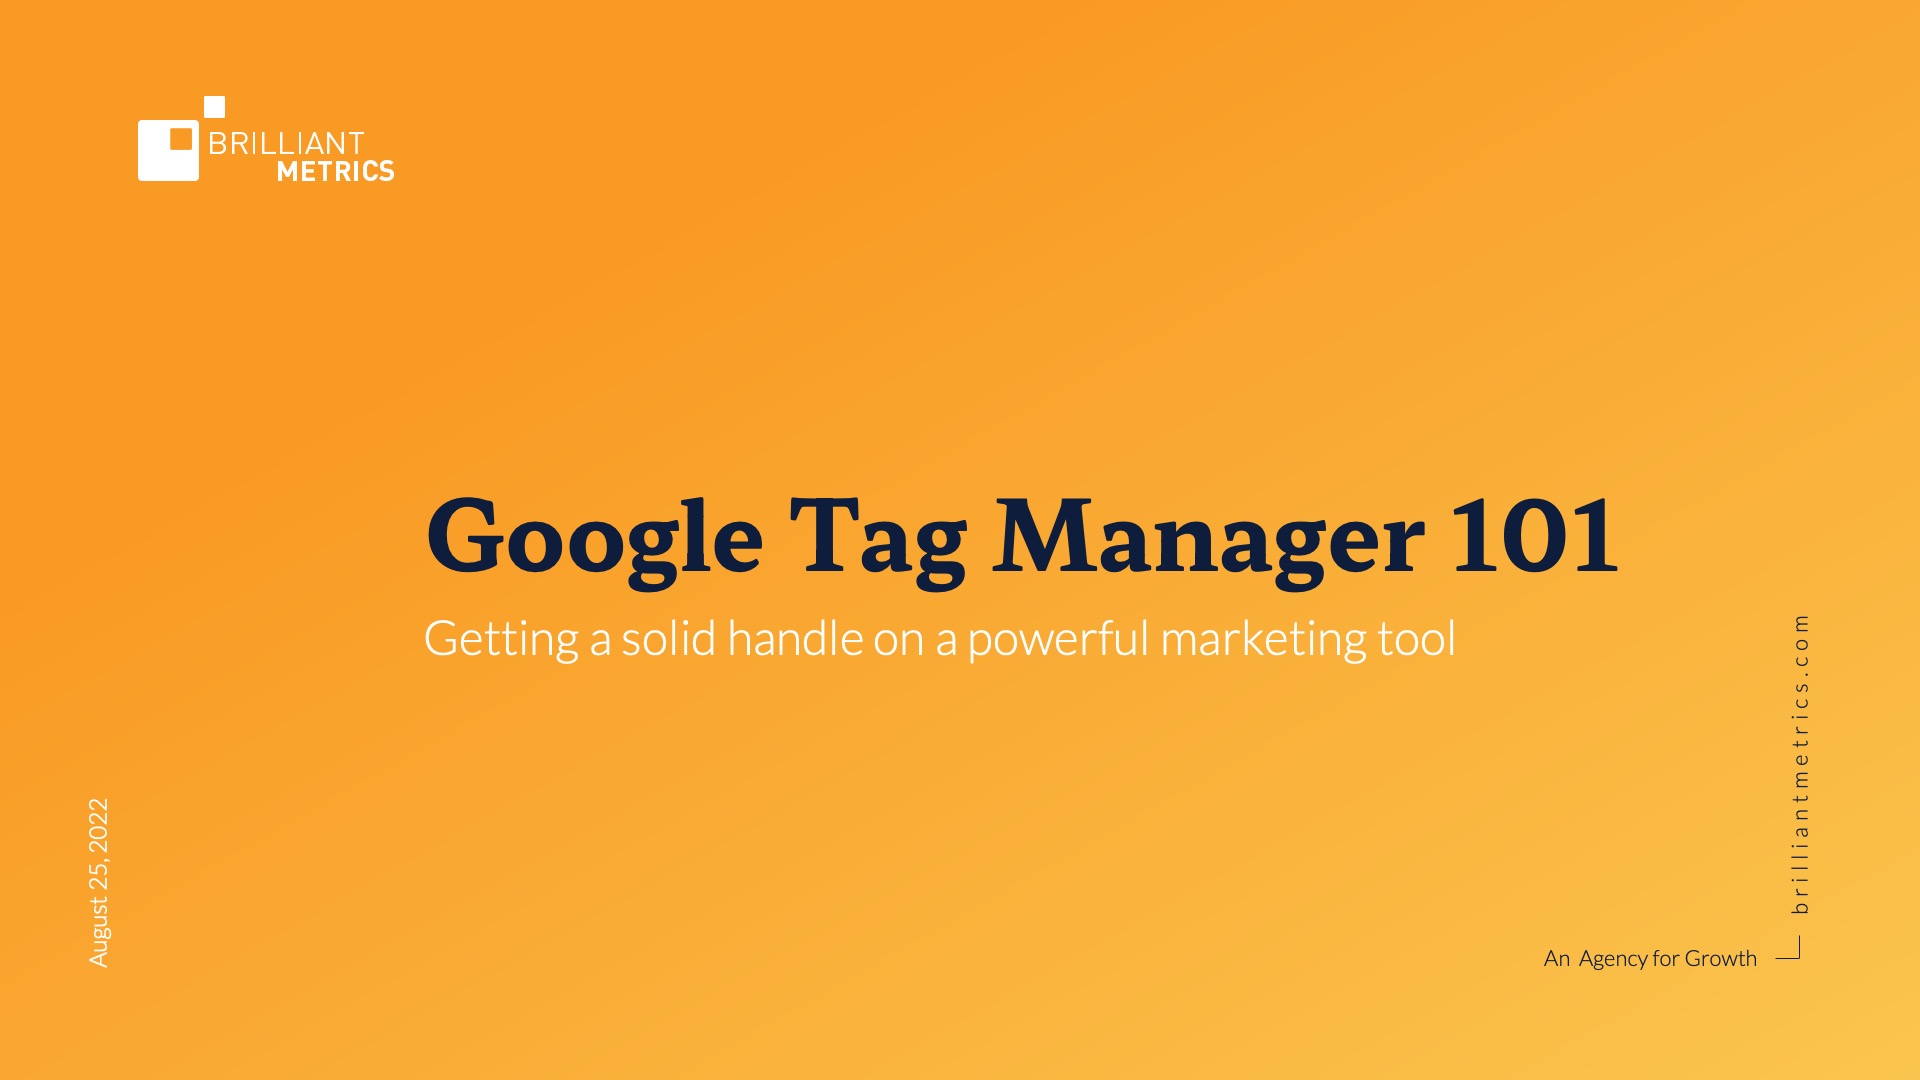 Google Tag Manager 101